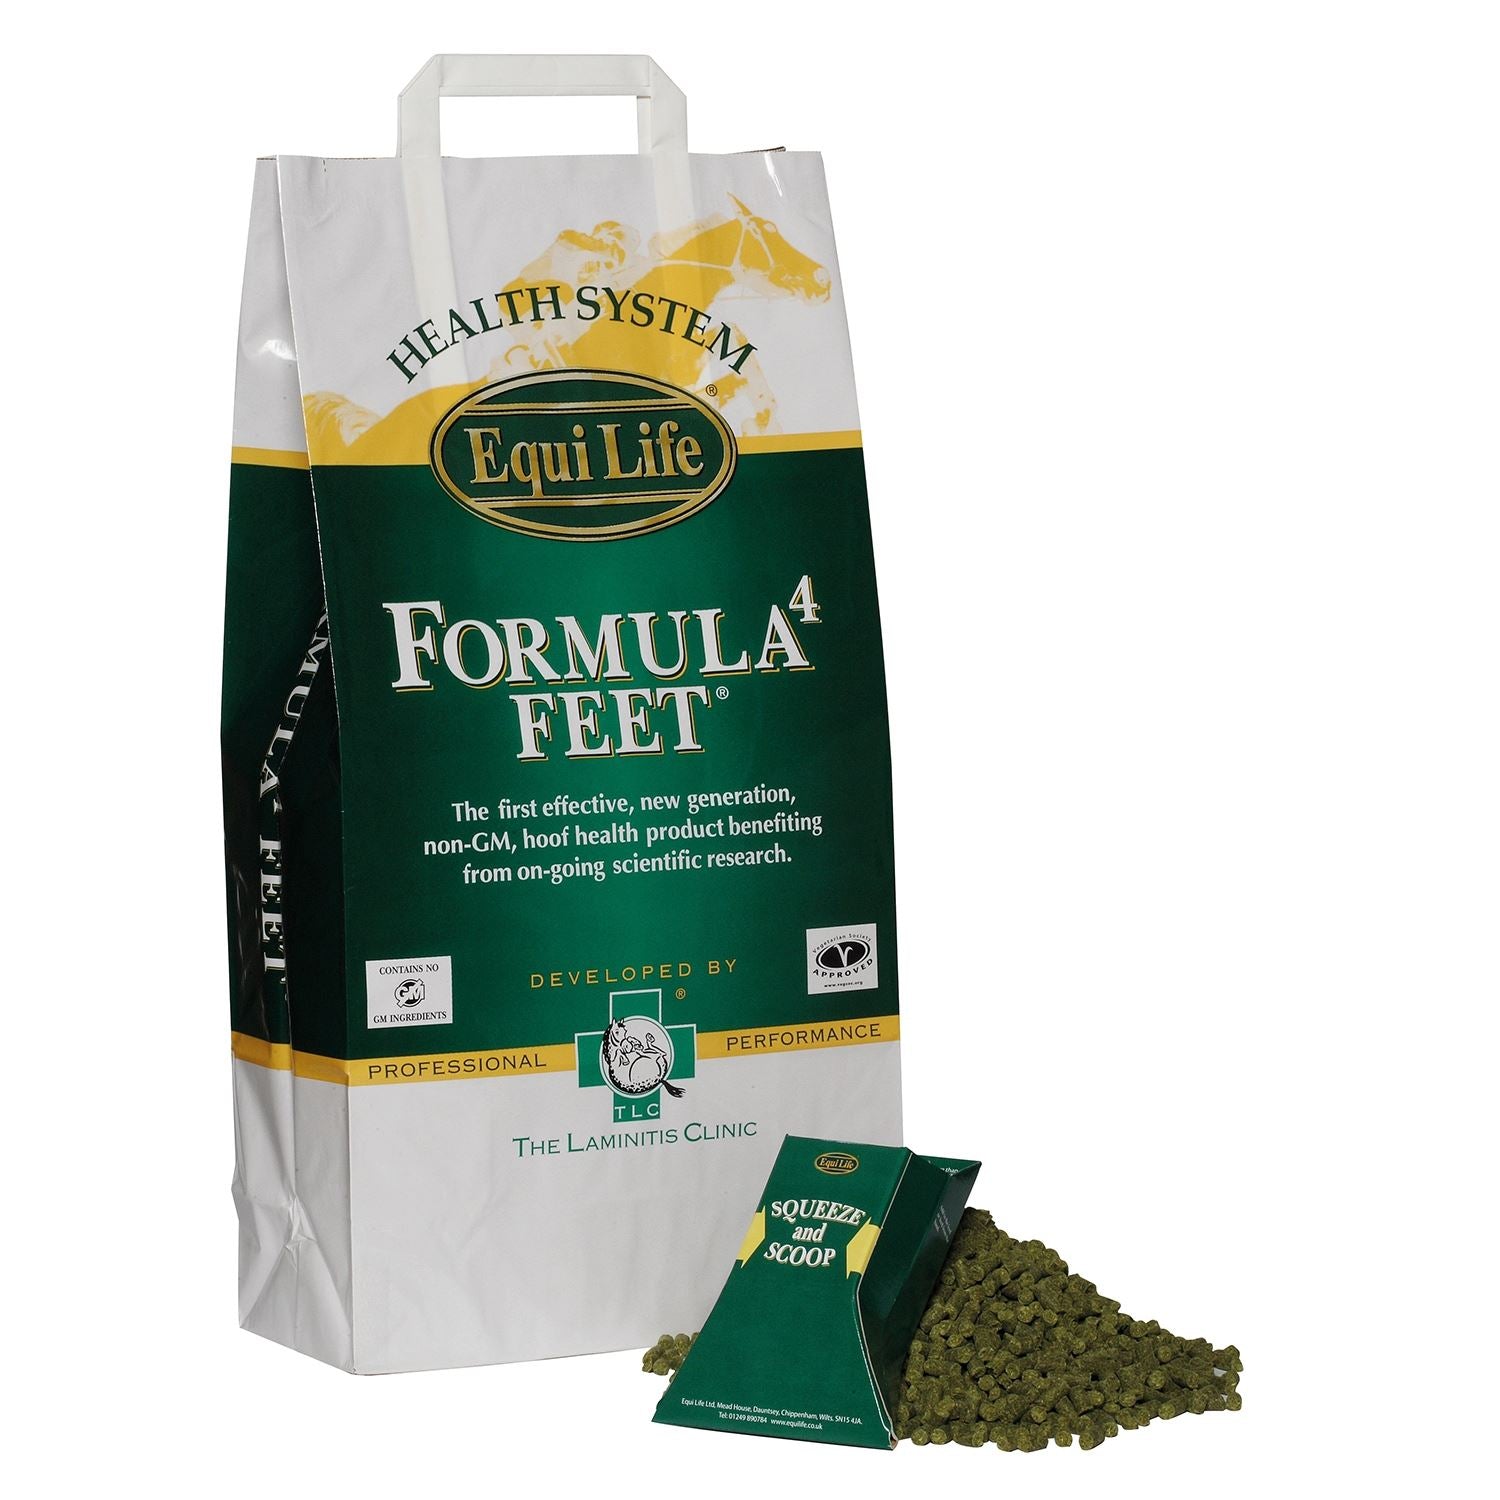 Equilife Formula4 Feet - Just Horse Riders